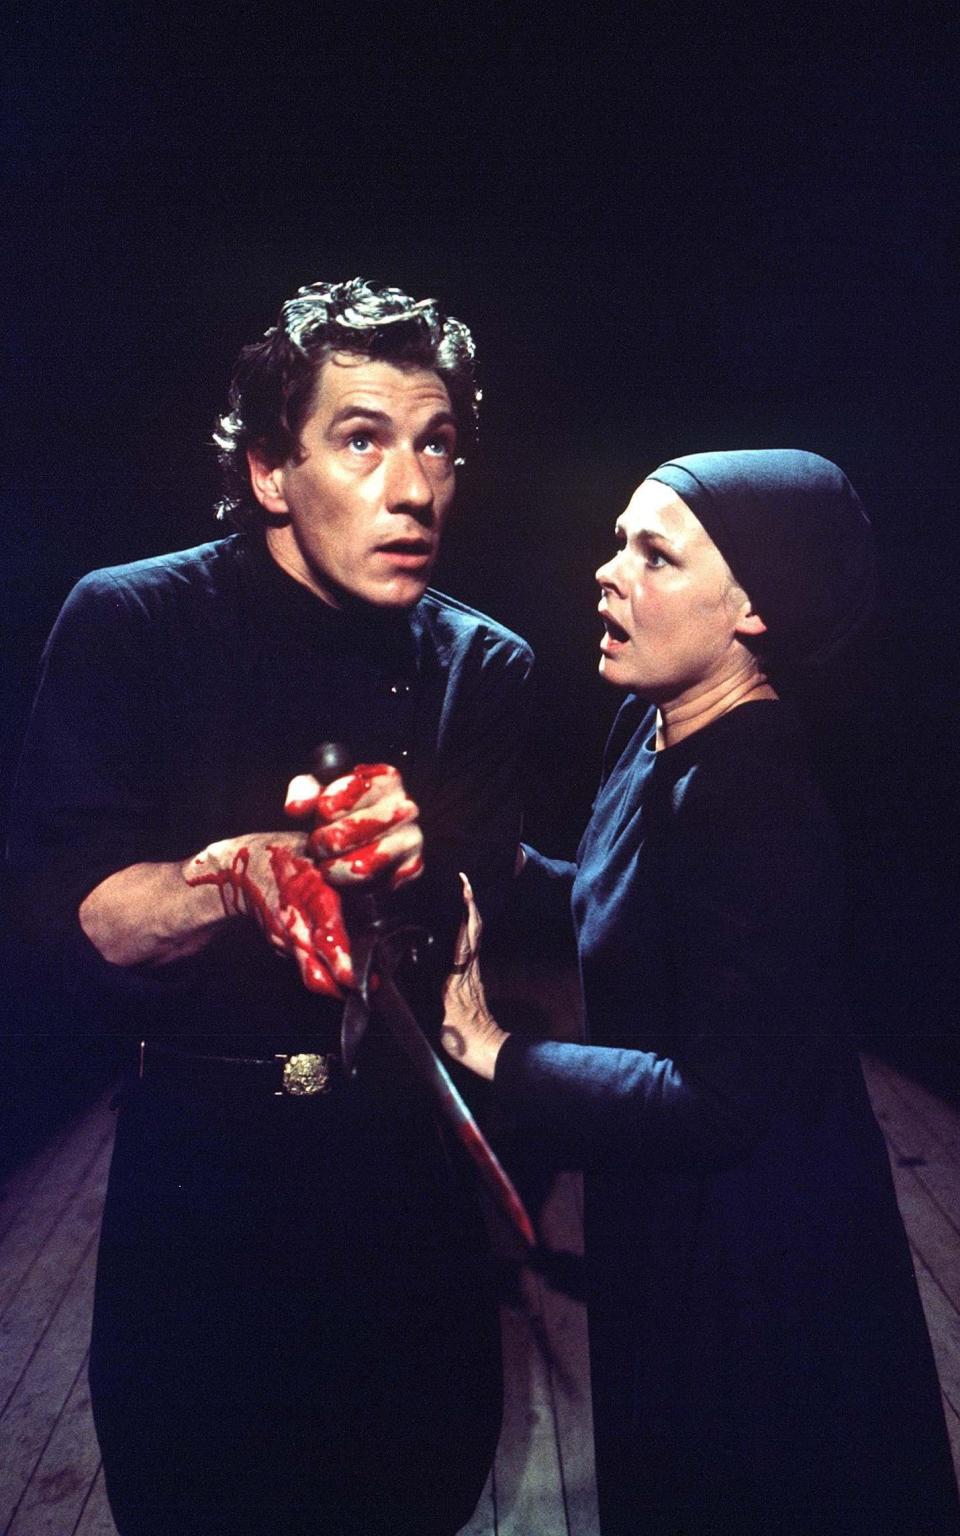 Ian McKellen notes he has 'an awful lot of experience speaking Shakespeare'. Pictured with Judi Dench in Macbeth in 1976 - Rex